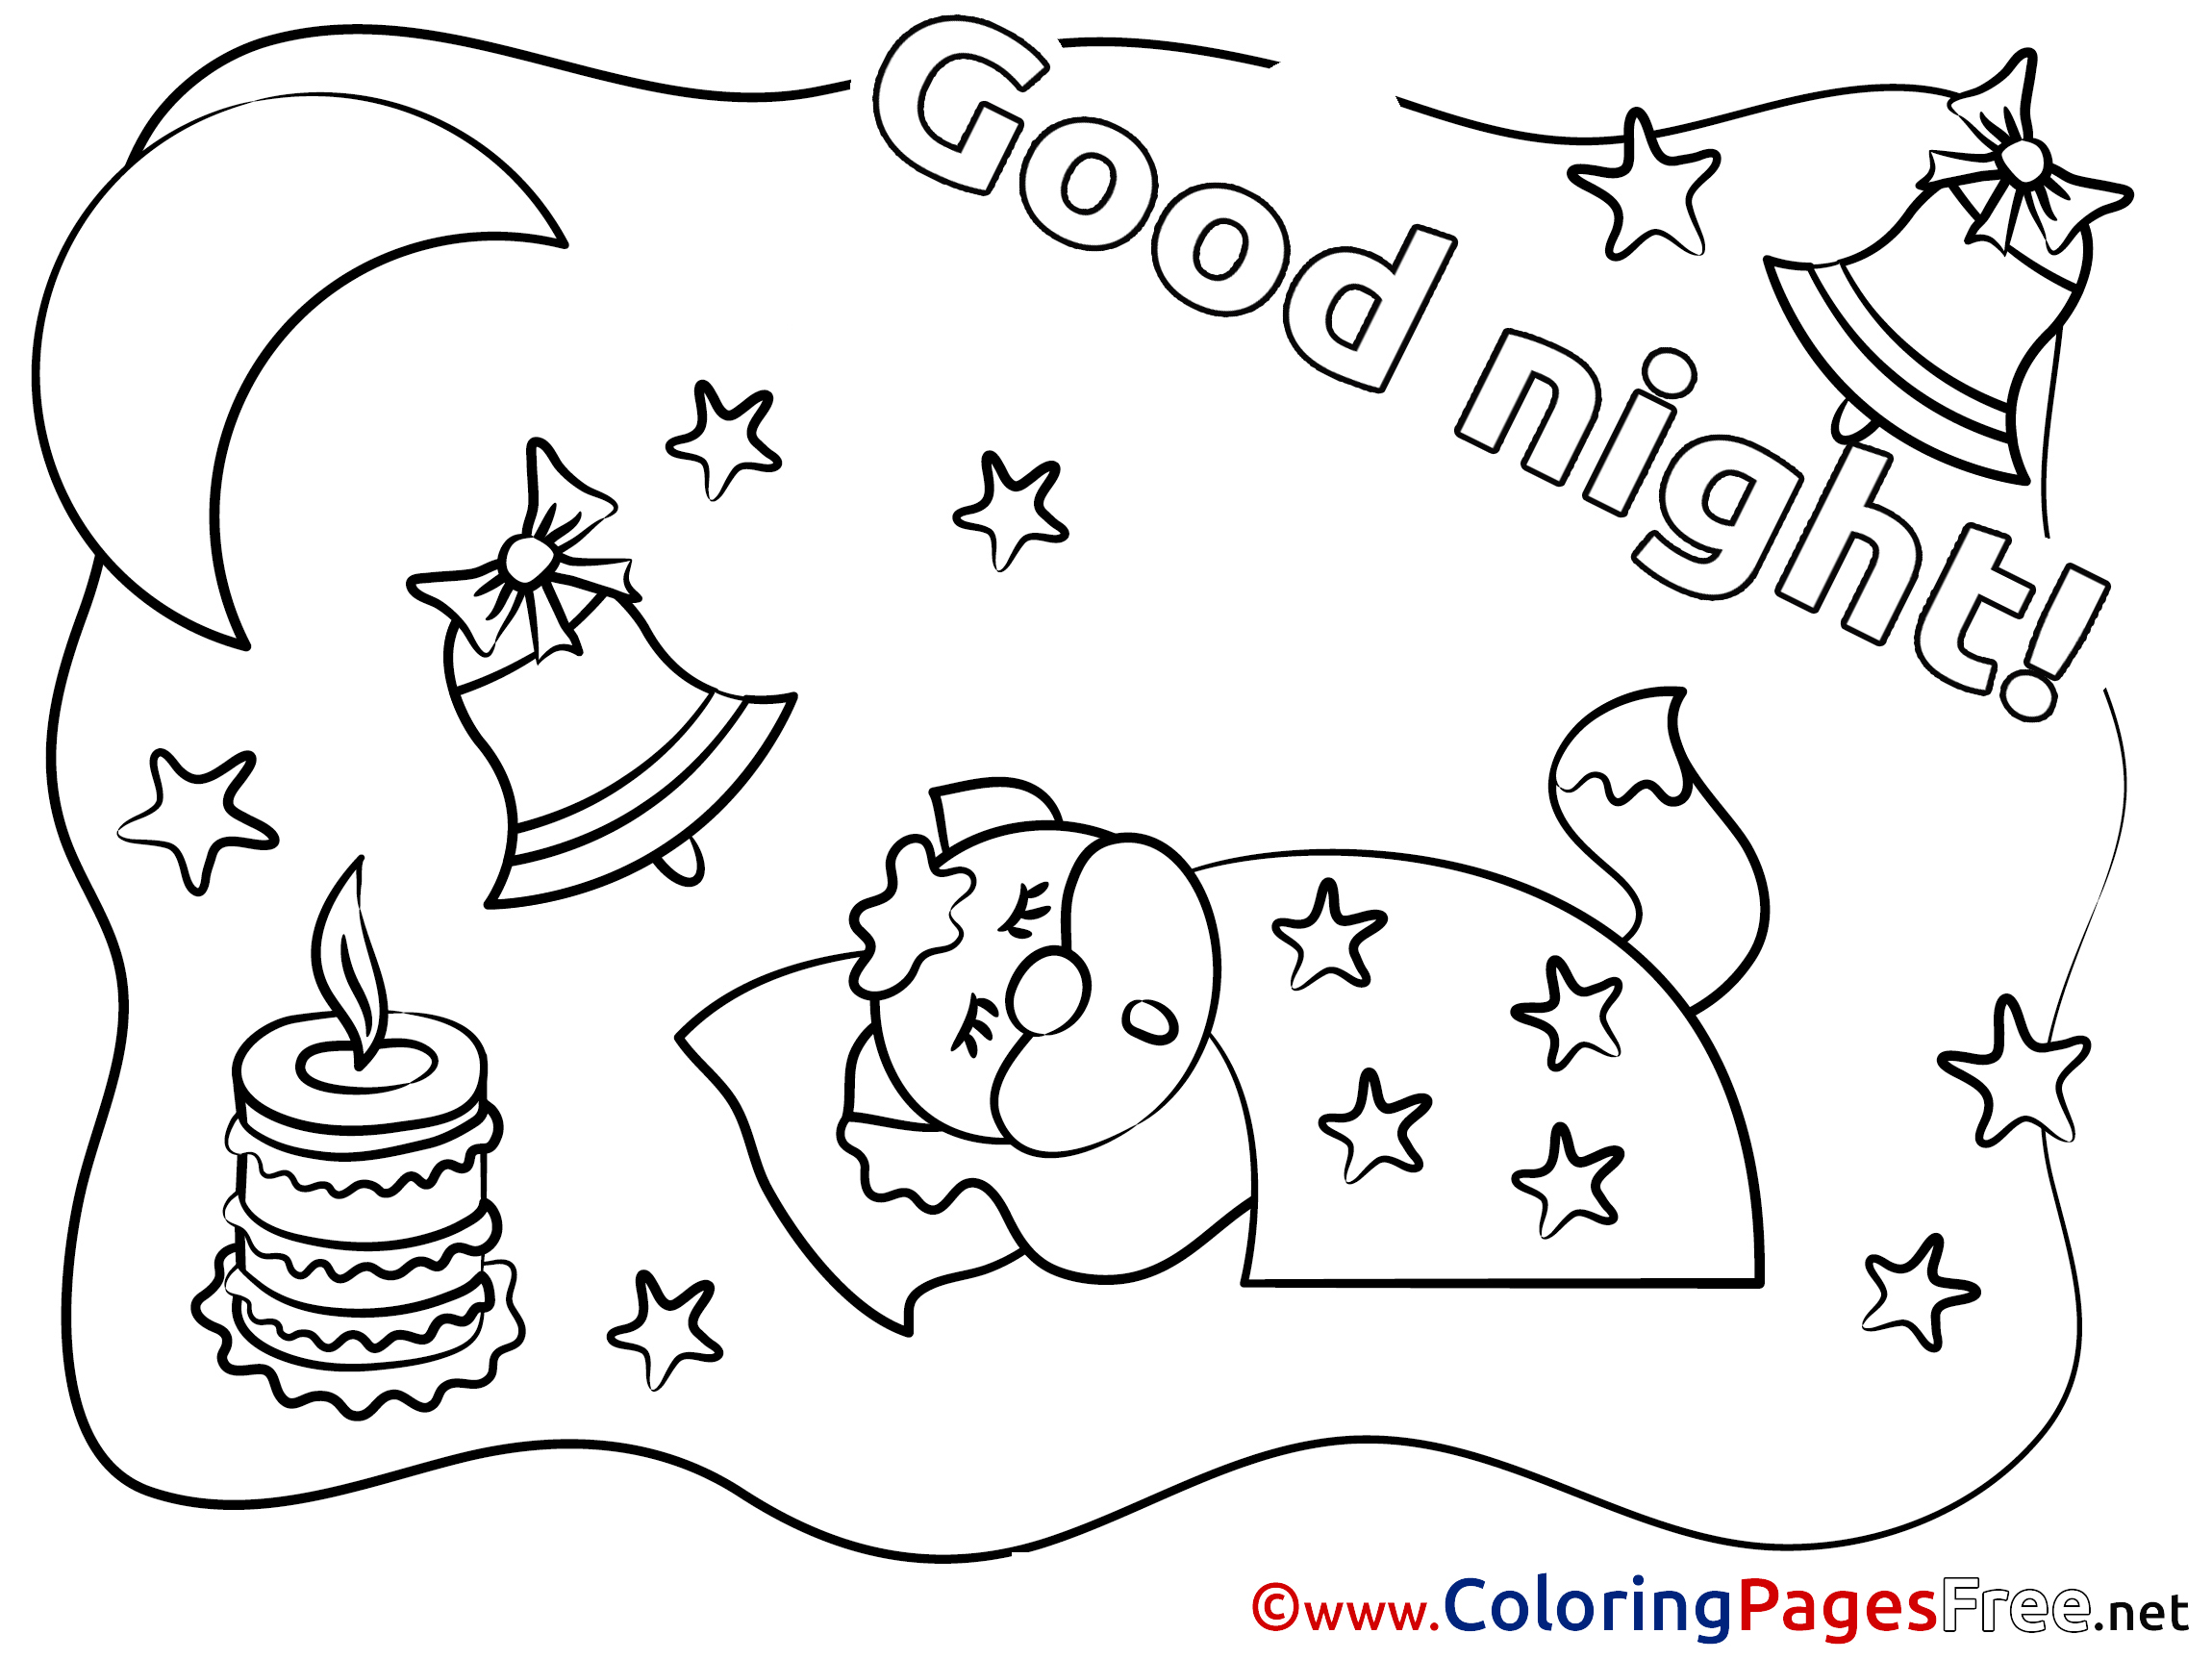 Download 80+  Good Night Kids Coloring Pages  - Good Night Harley Quinn Colouring Print Coloring Pages ...